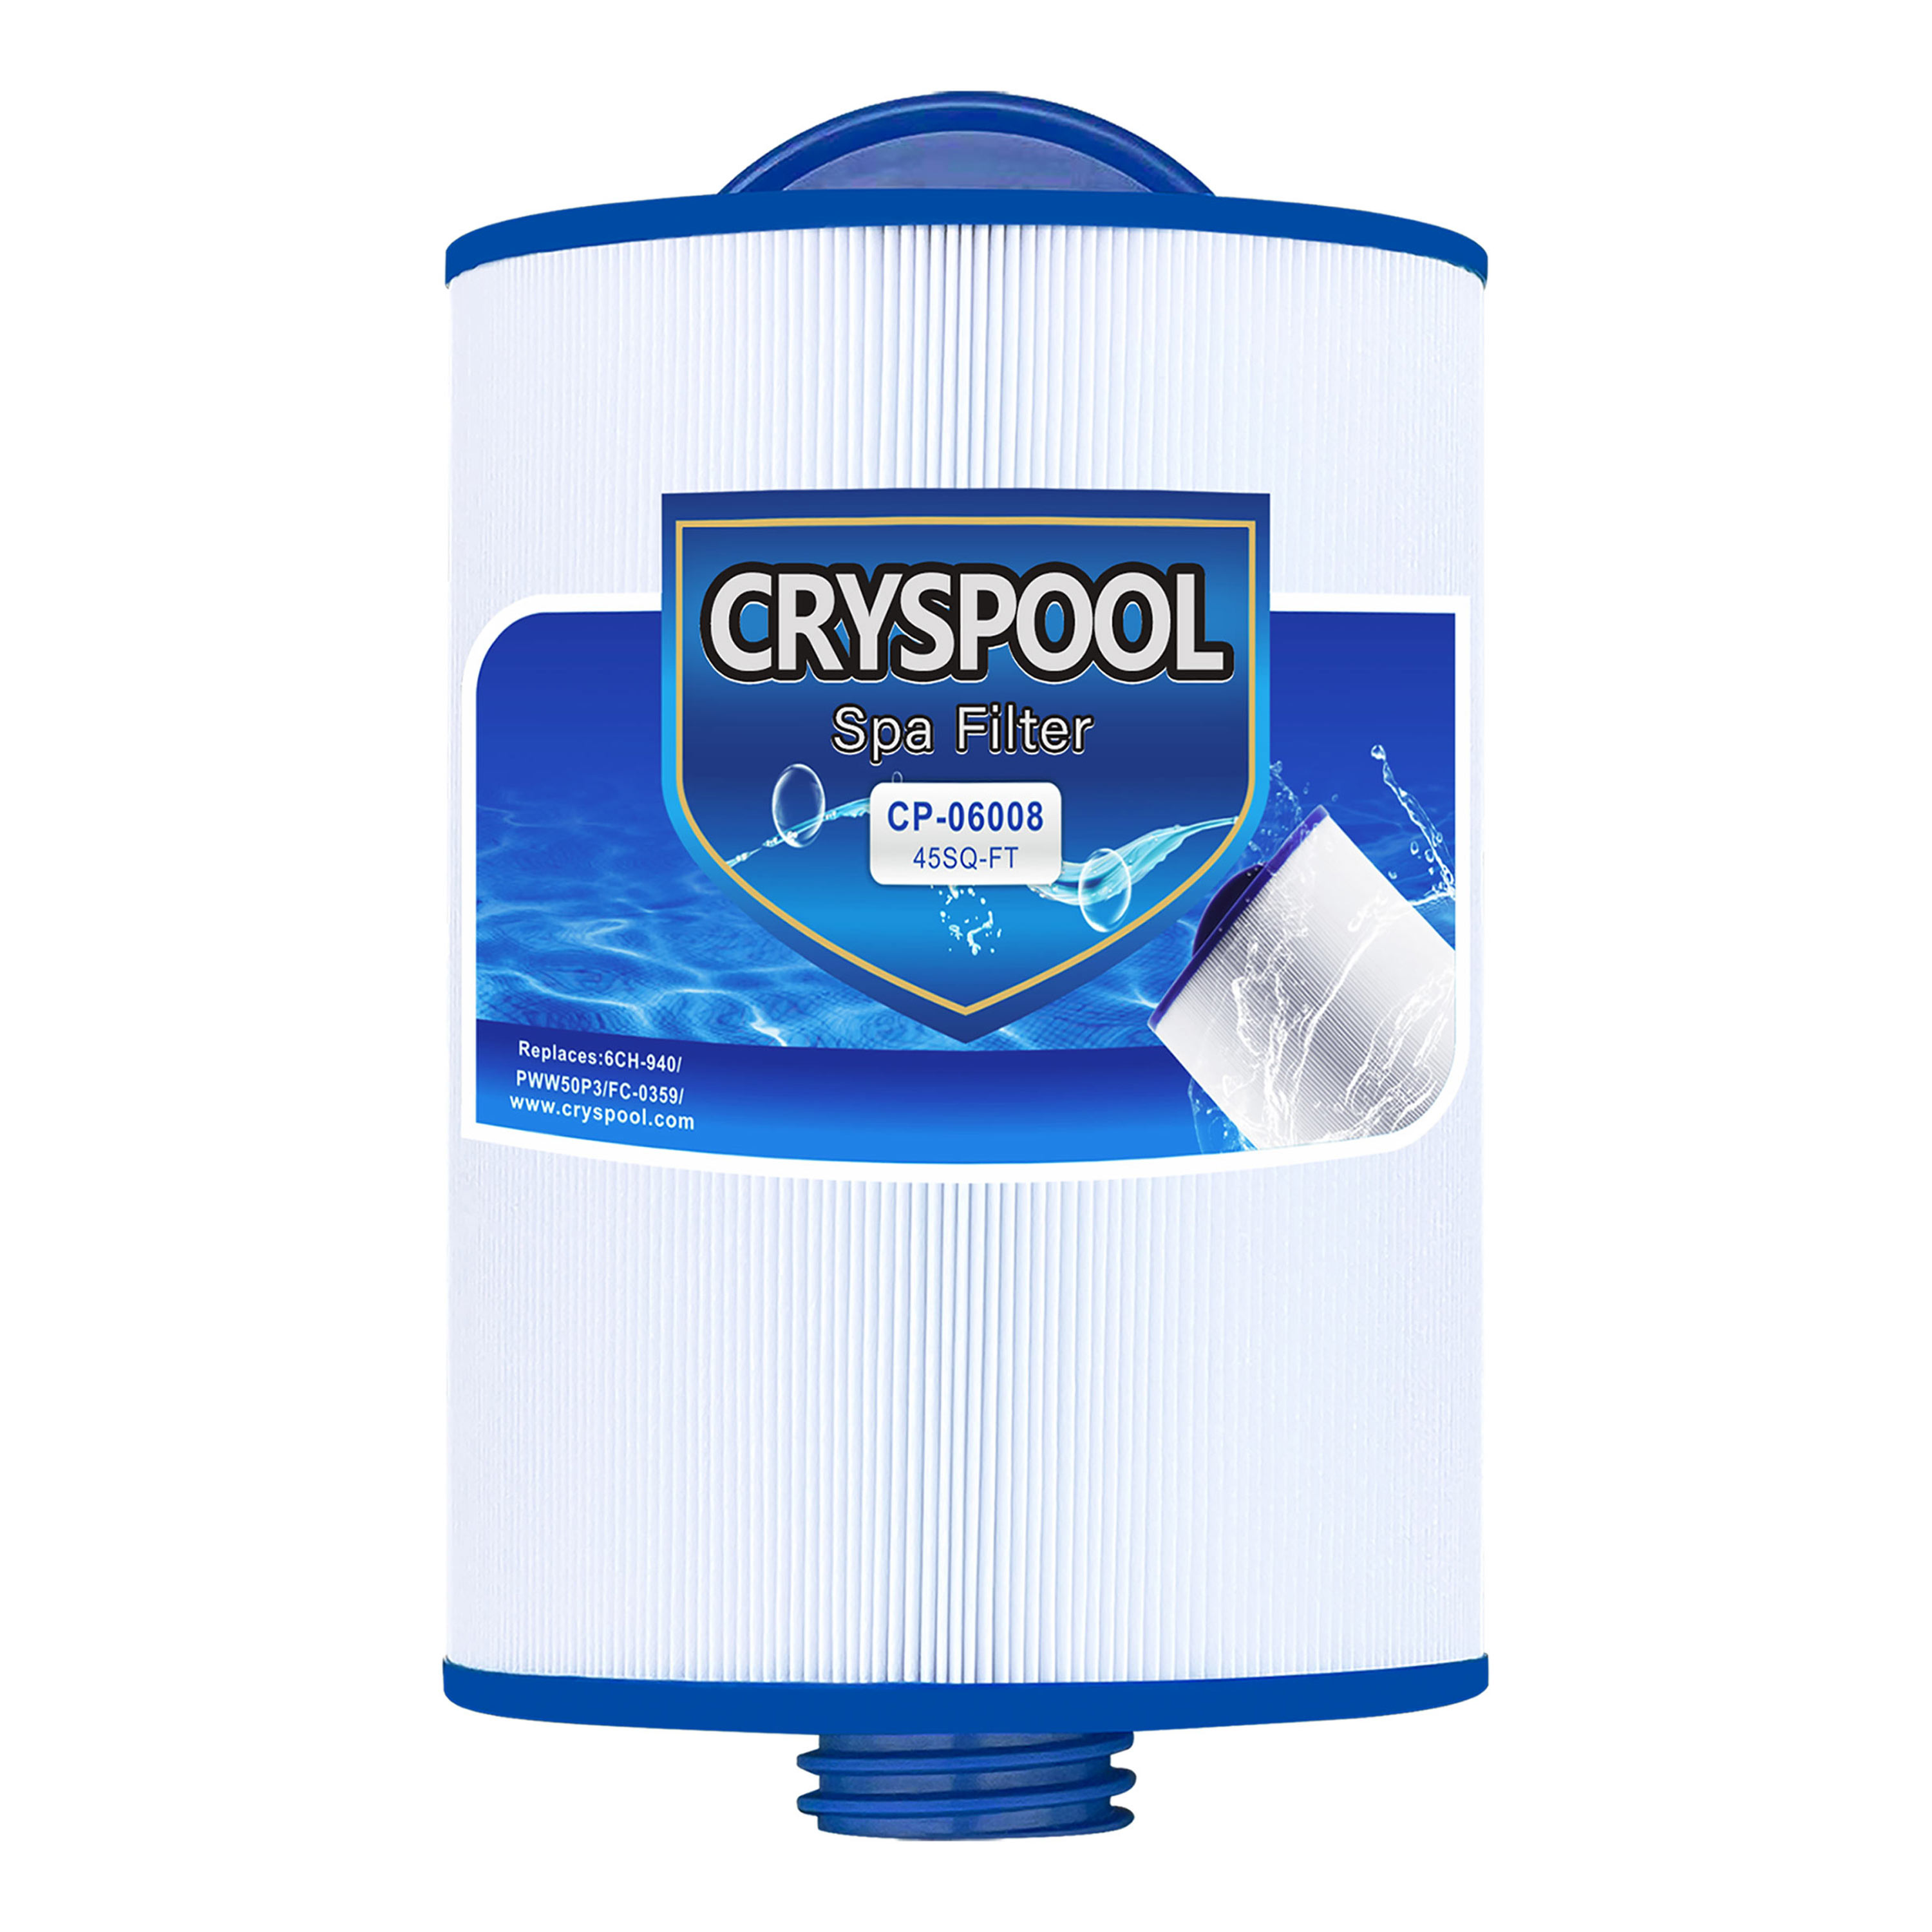 2021 wholesale price Hot Tub Filter Canister - Cryspool Coarse-Thread Spa Filter Replaces 6CH-940, PWW50P3 (NOT PWW50P4), Filbur FC-0359, Waterway Vita Aber,Viking Spa Hot Tub Filter, 45 Sq.Ft. &#...